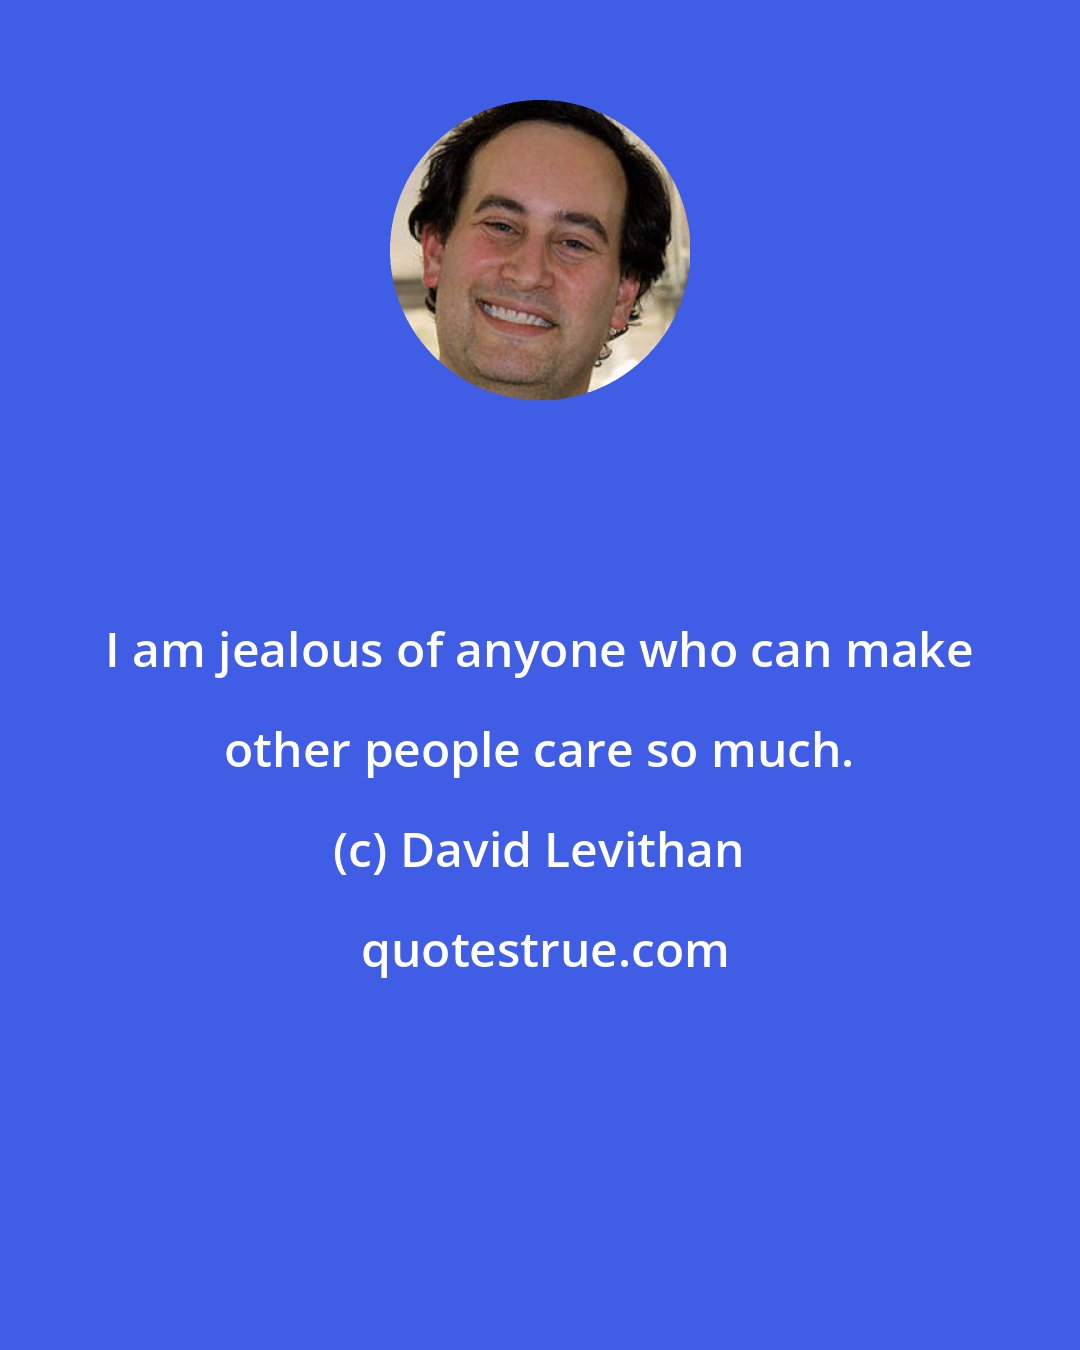 David Levithan: I am jealous of anyone who can make other people care so much.